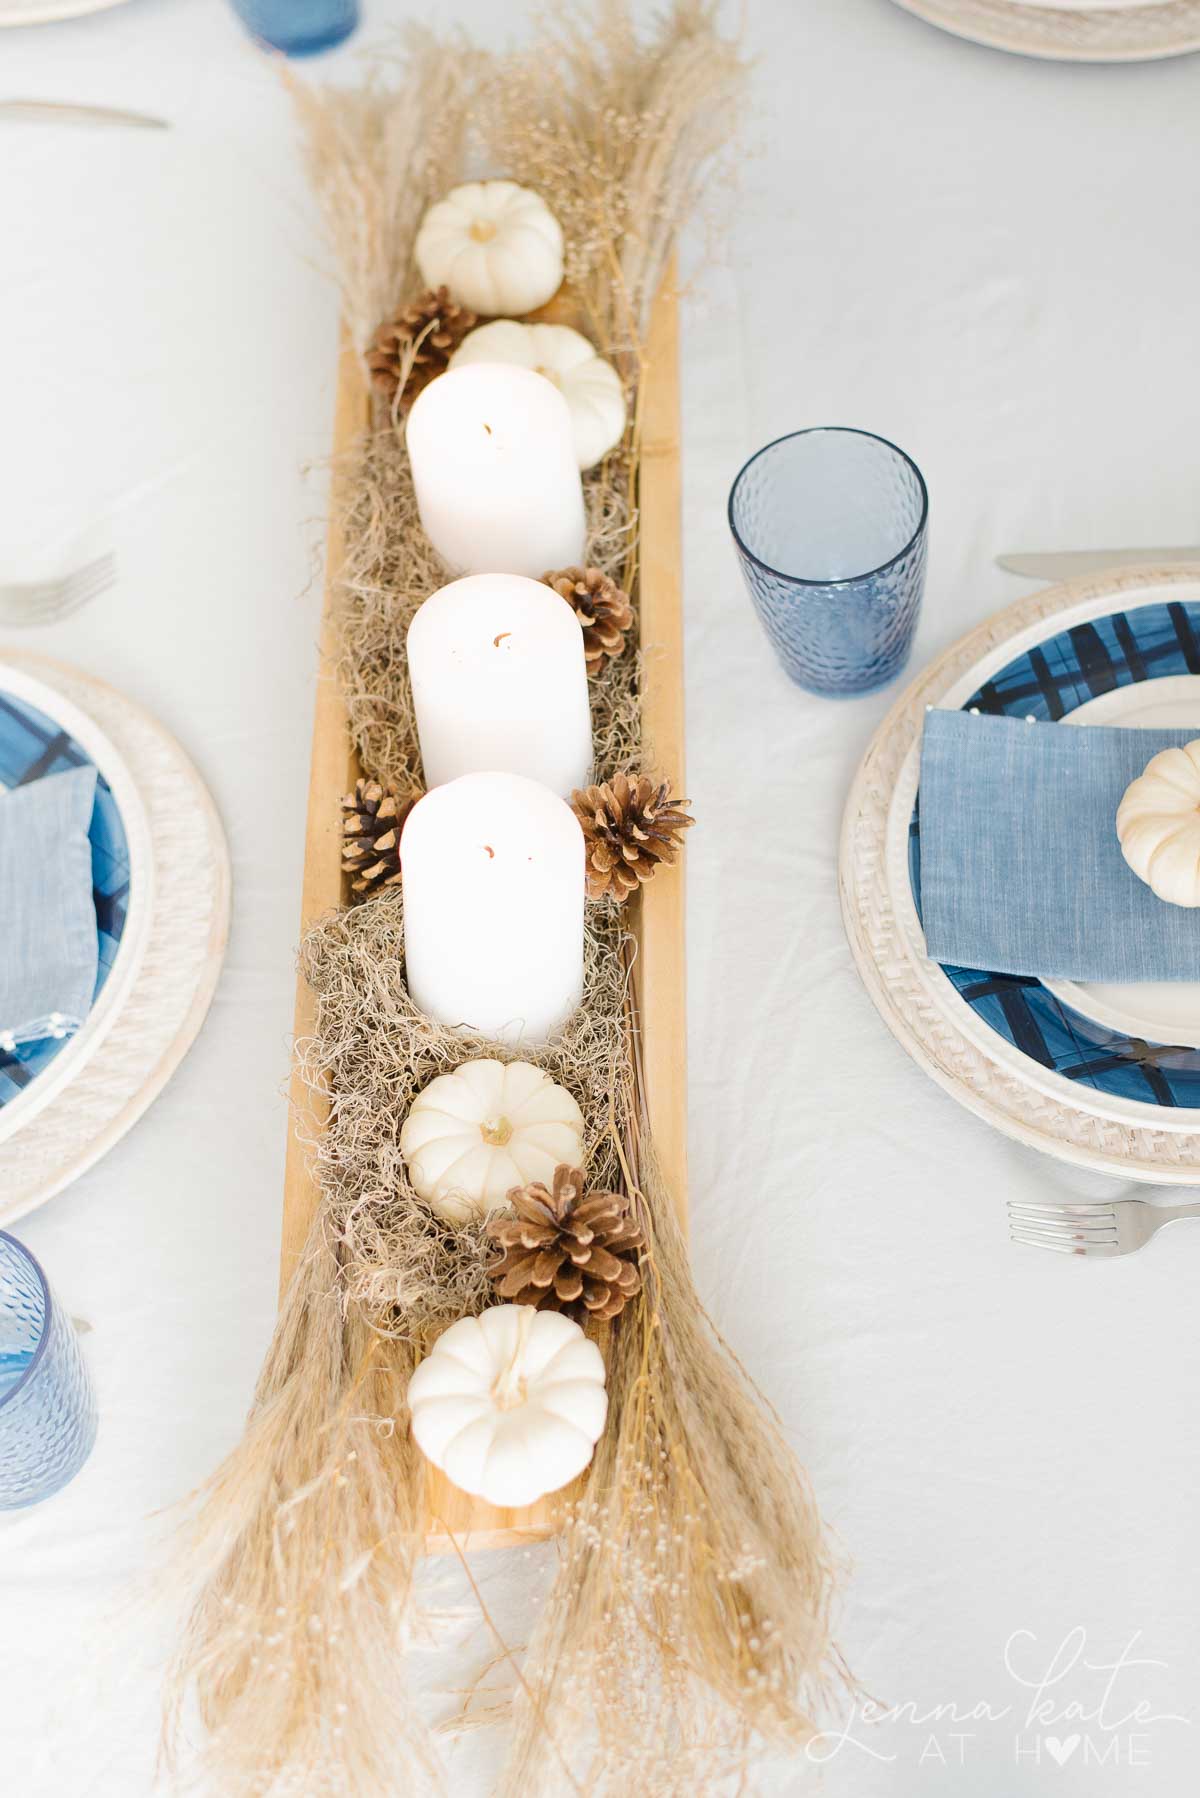 White candles and other neutral colored nature inspired objects in the centerpiece